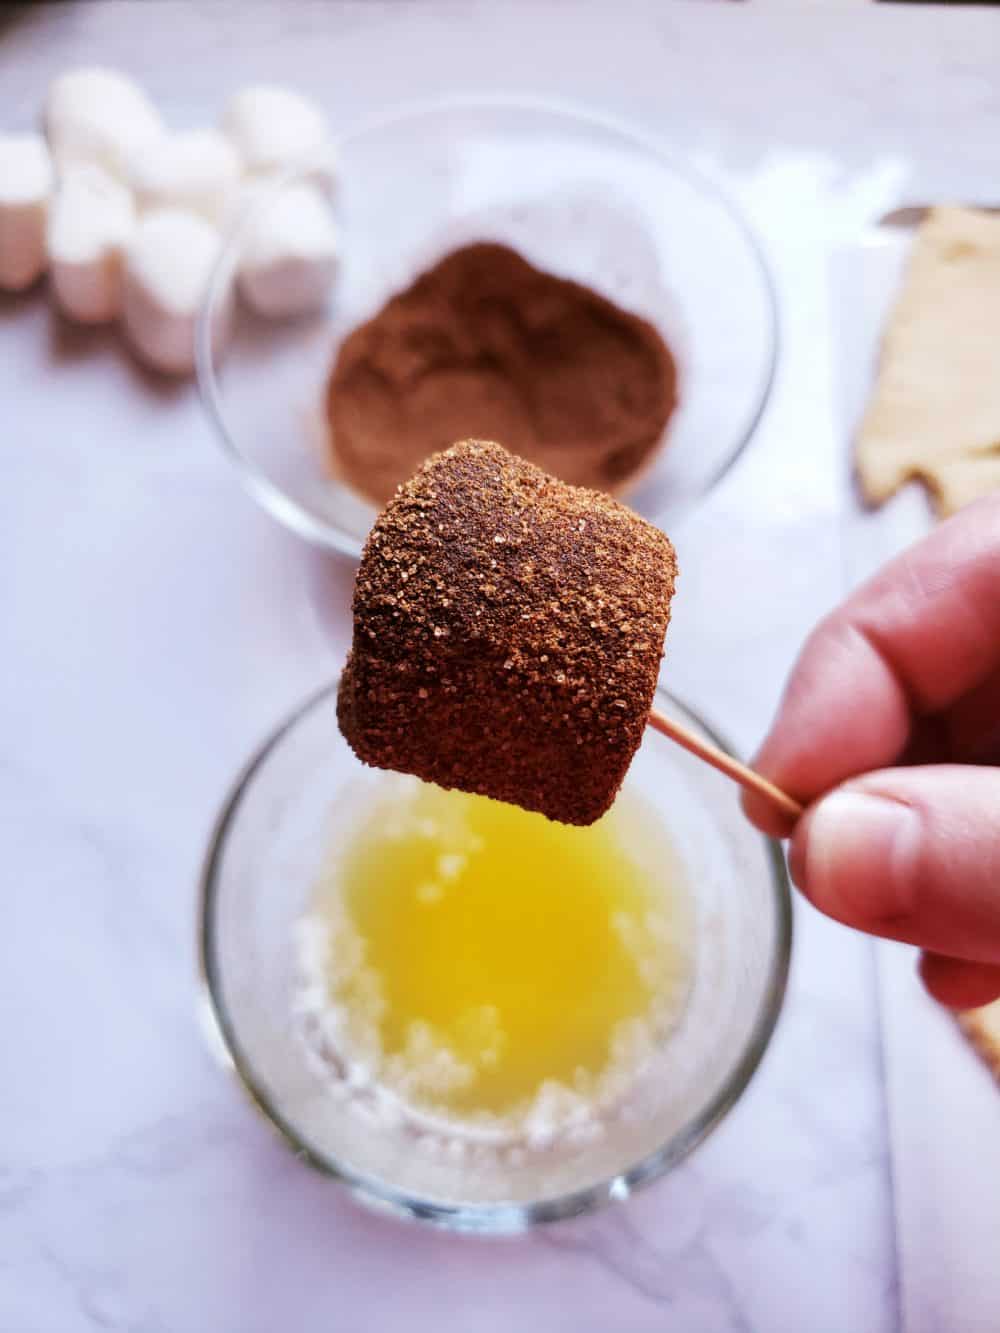 Dip marshmallow in butter and cinnamon/sugar mixture.